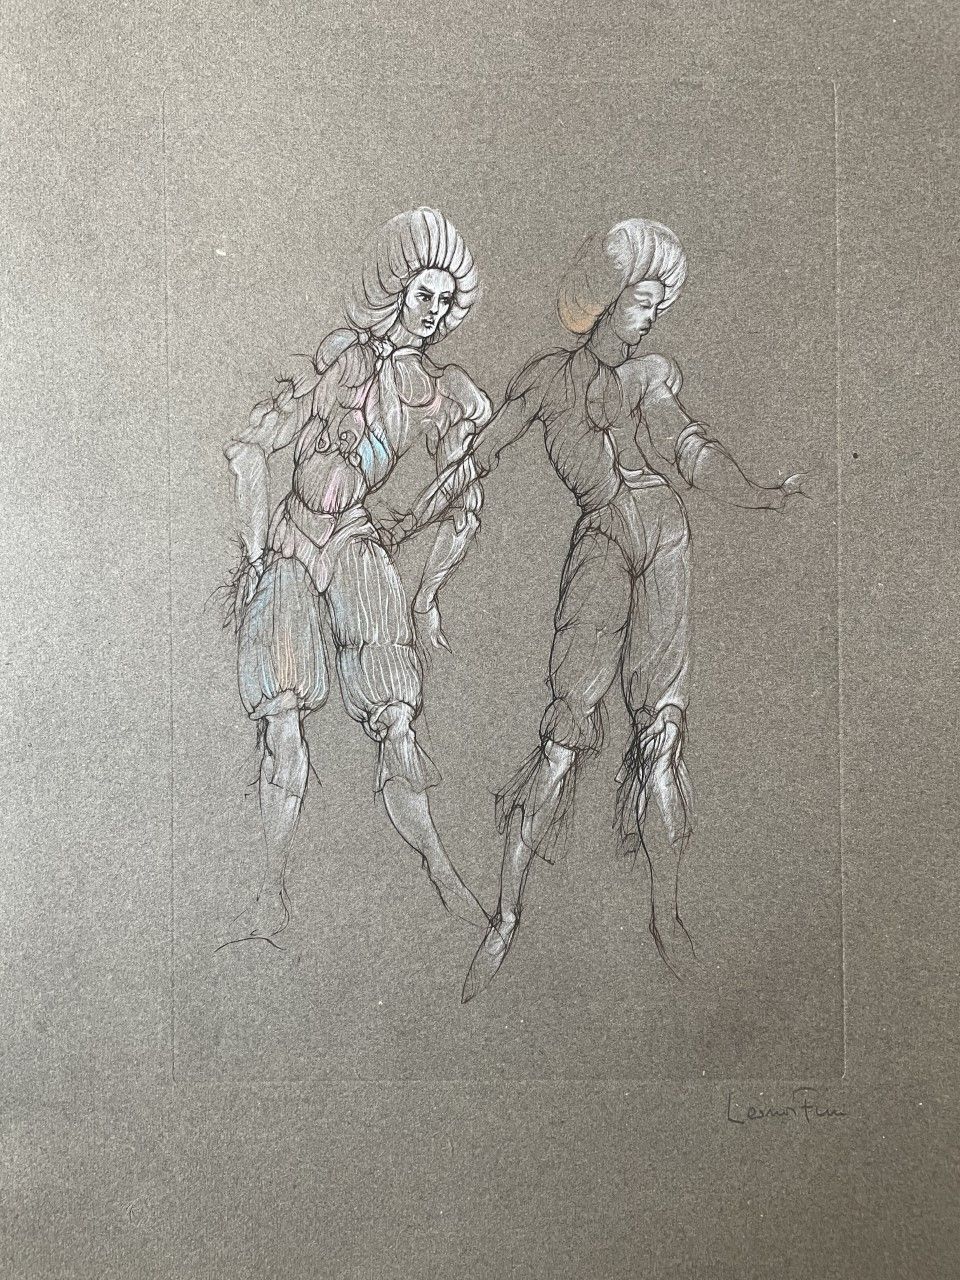 FINI Léonor (1908 - 1996) Engraving "THE DANCING COUPLE "Signed by hand in penci&hellip;